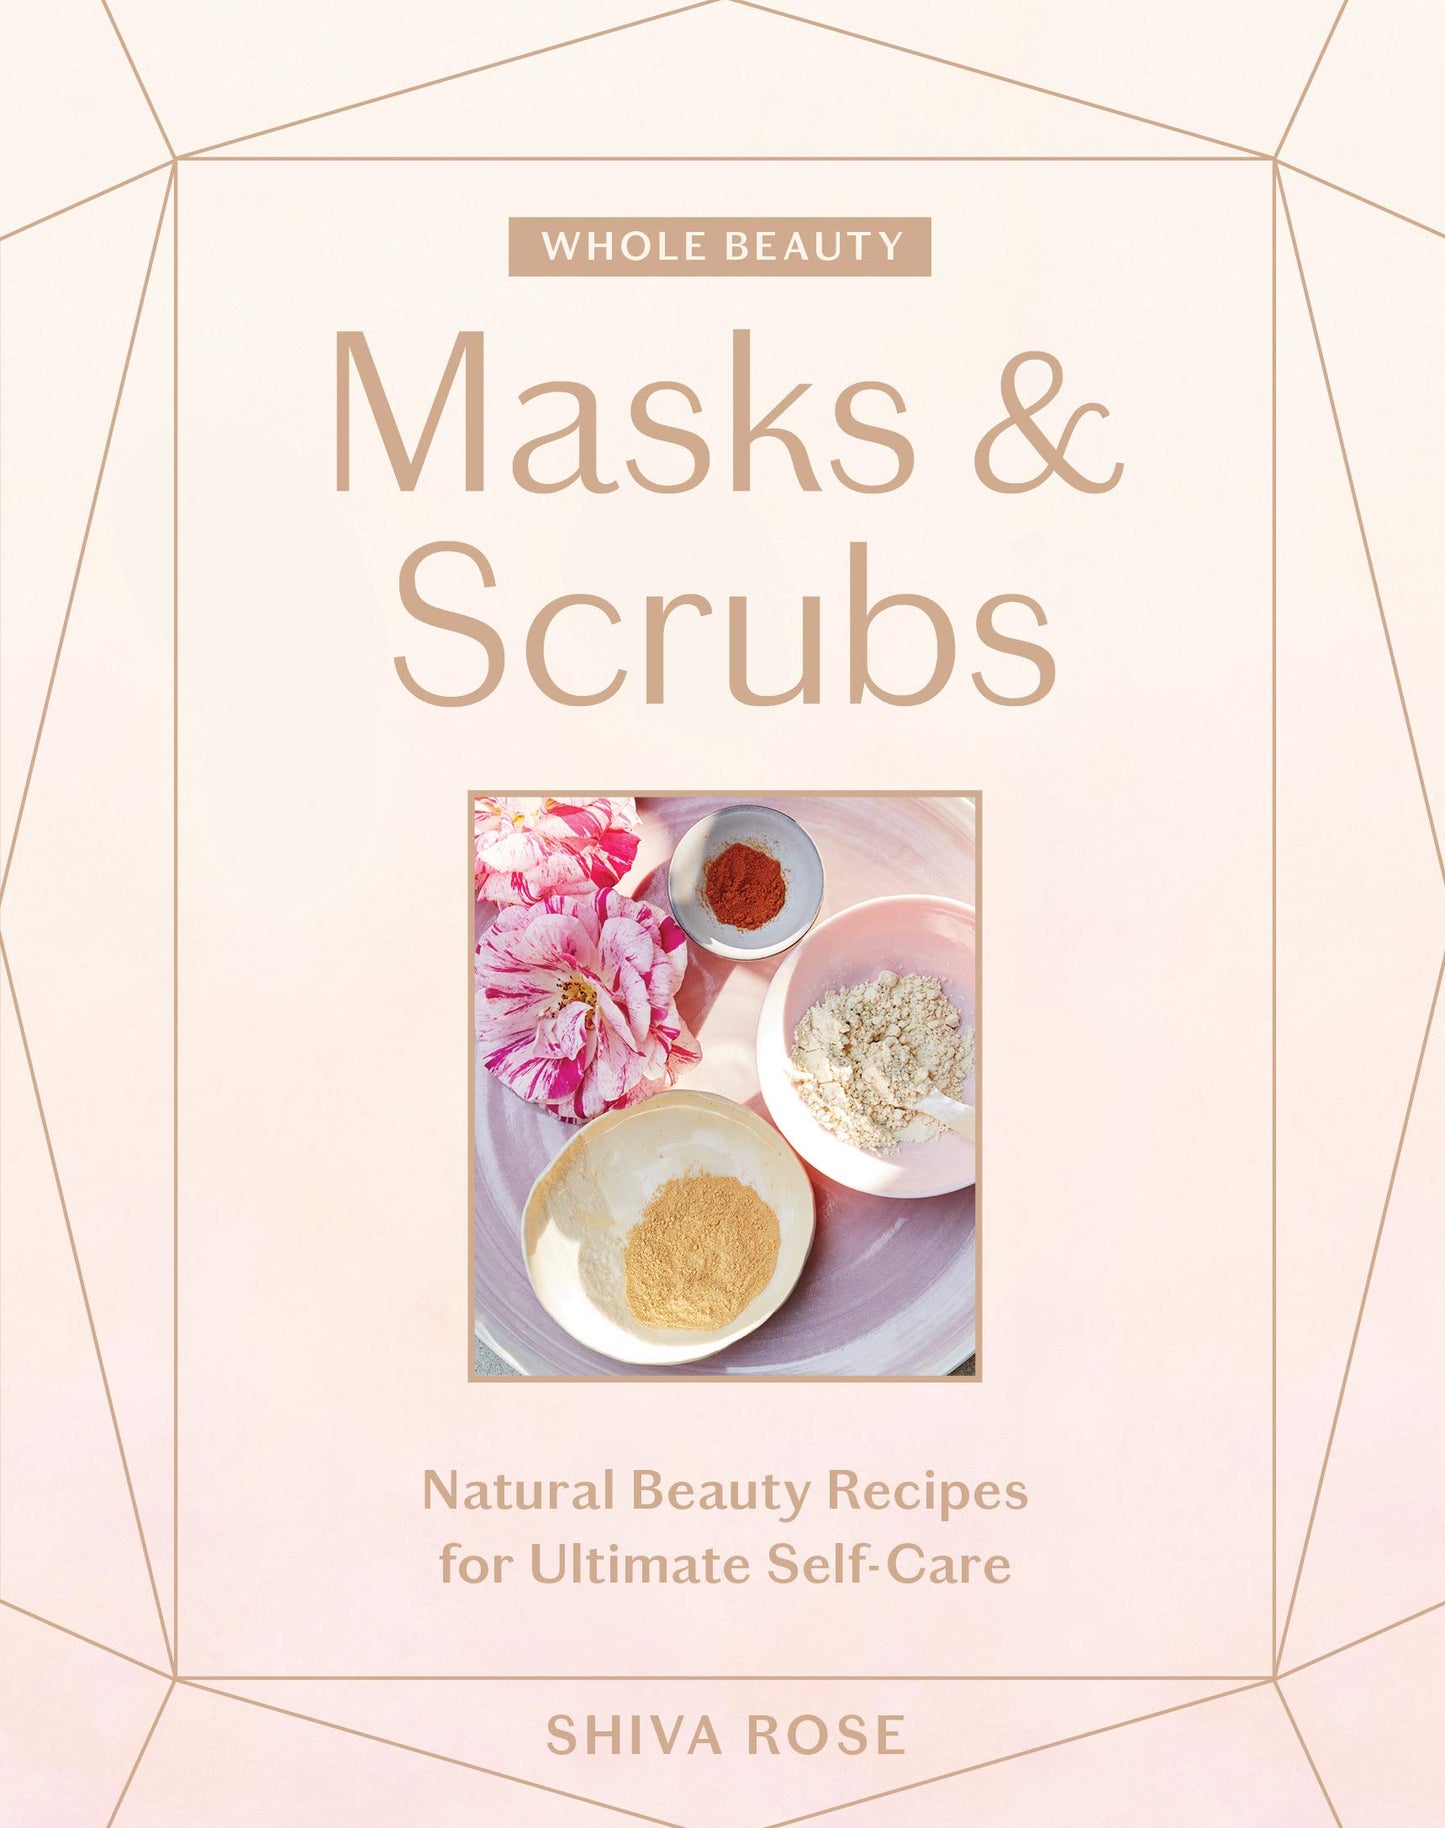 Whole Beauty Masks & Scrubs: Natural Beauty Recipes for Ultimate Self-Care